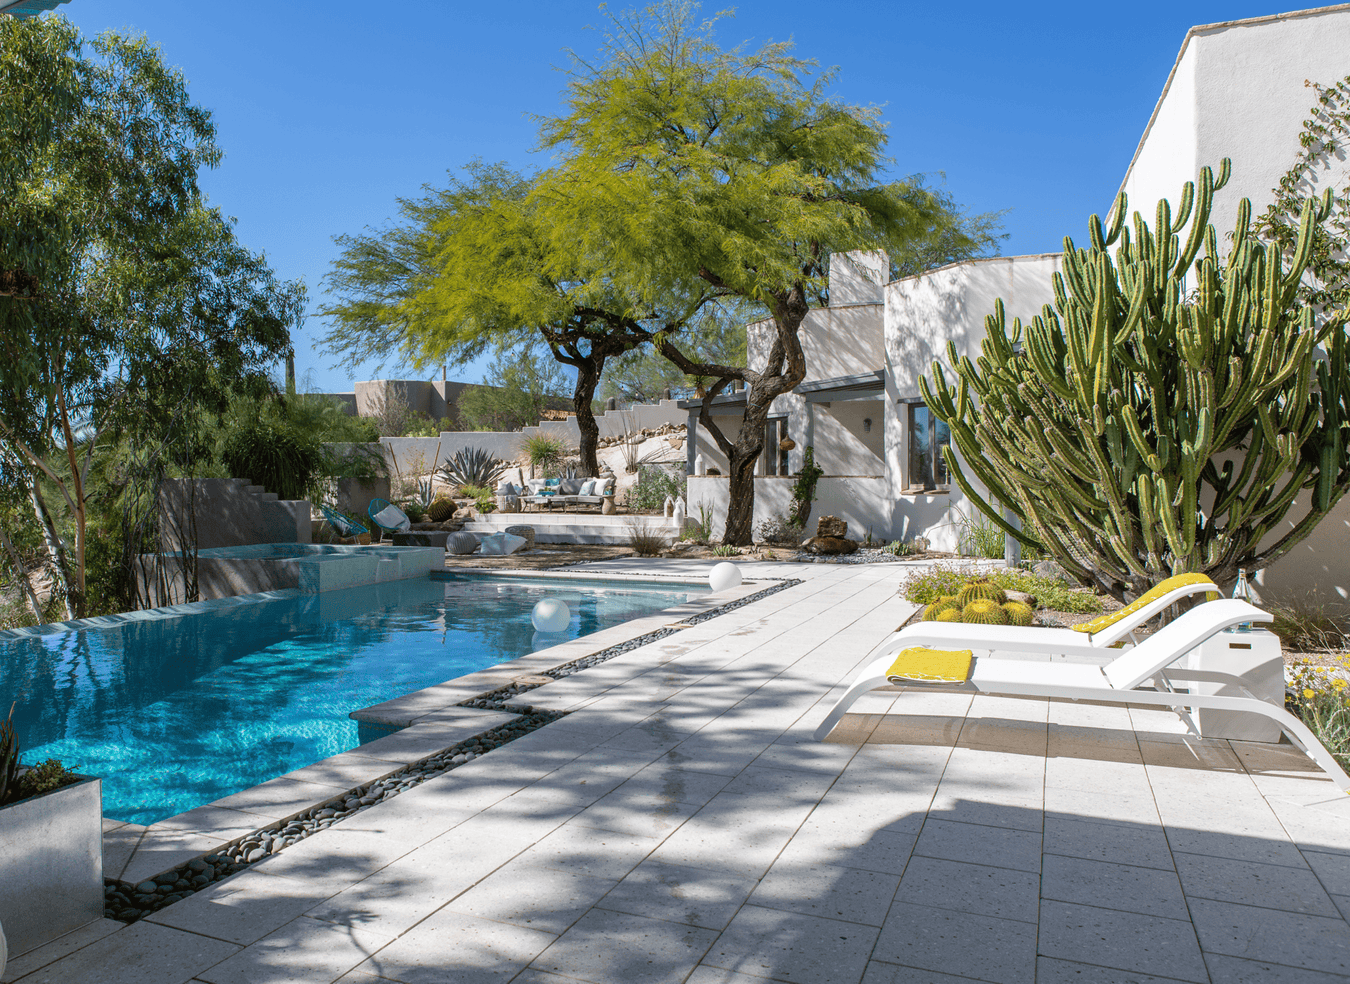 Desert patio and pool with white chaise lounge chairs.